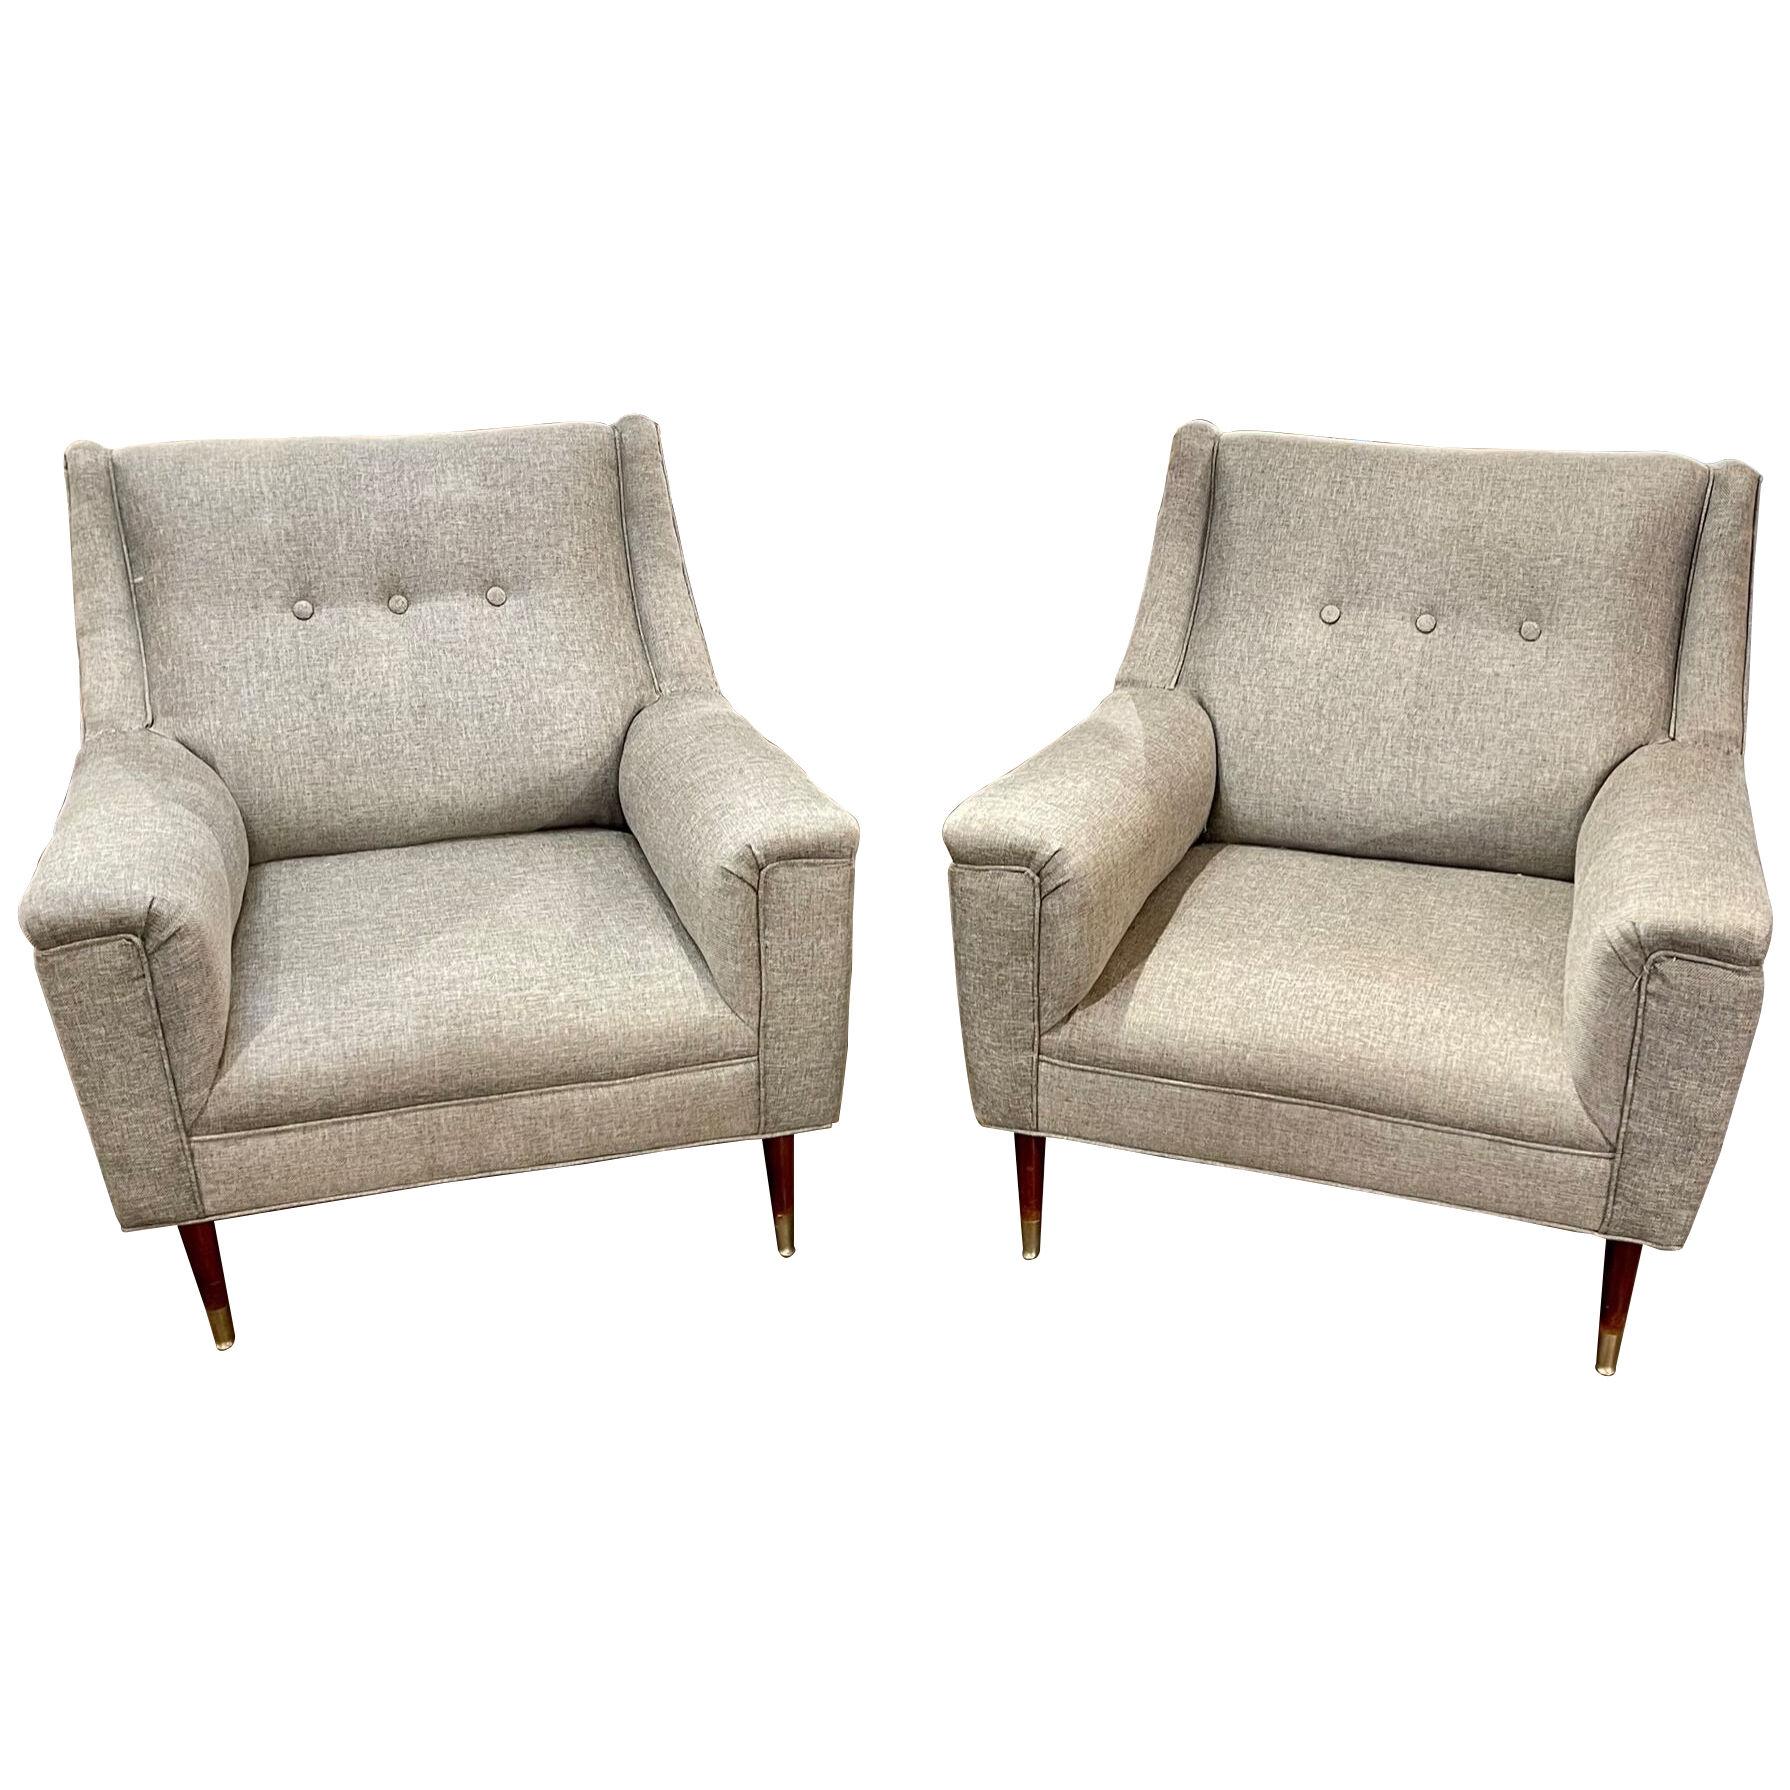 Pair of Italian Mid-Century Upholstered Club Chairs